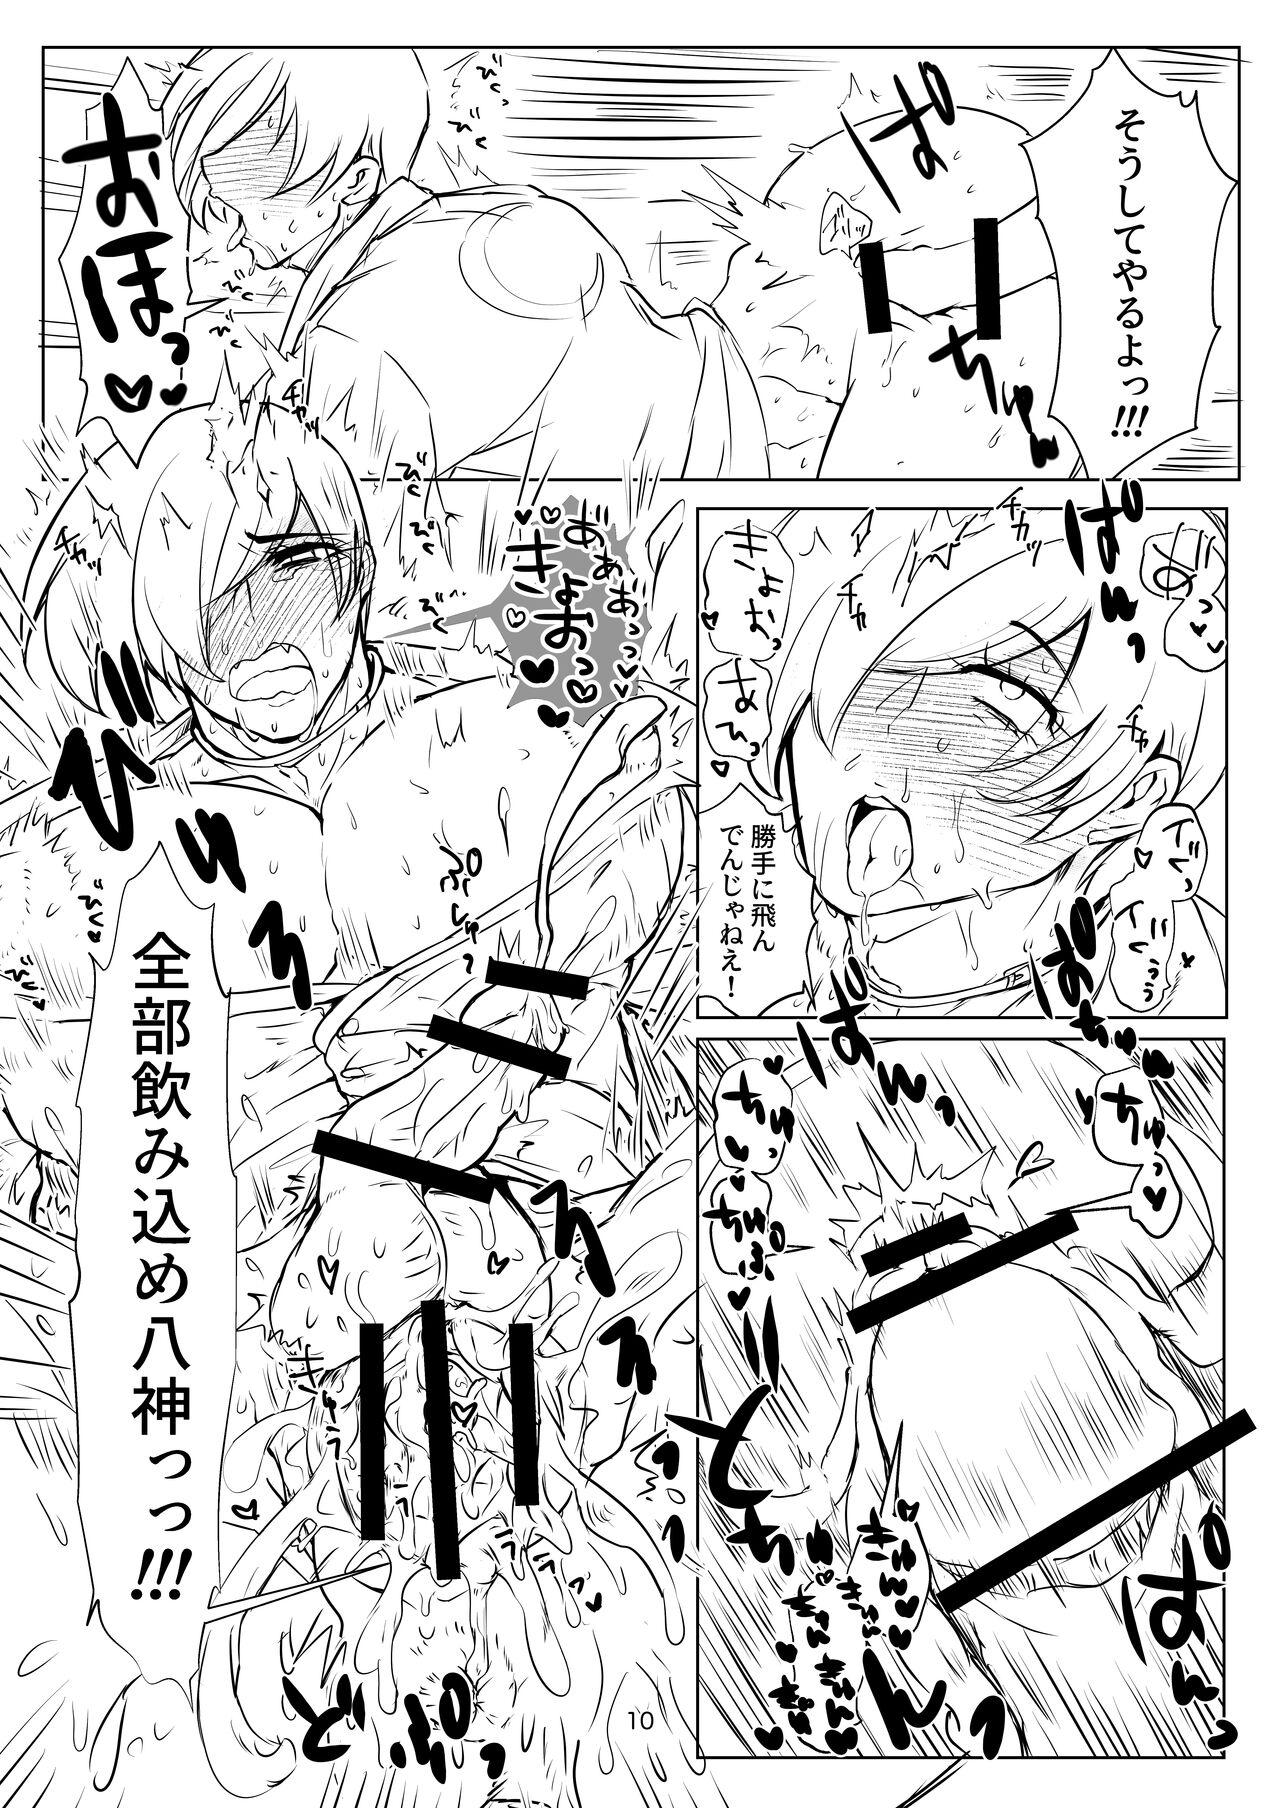 Pussy Eating R18 Manga EAT ME! - King of fighters English - Page 10